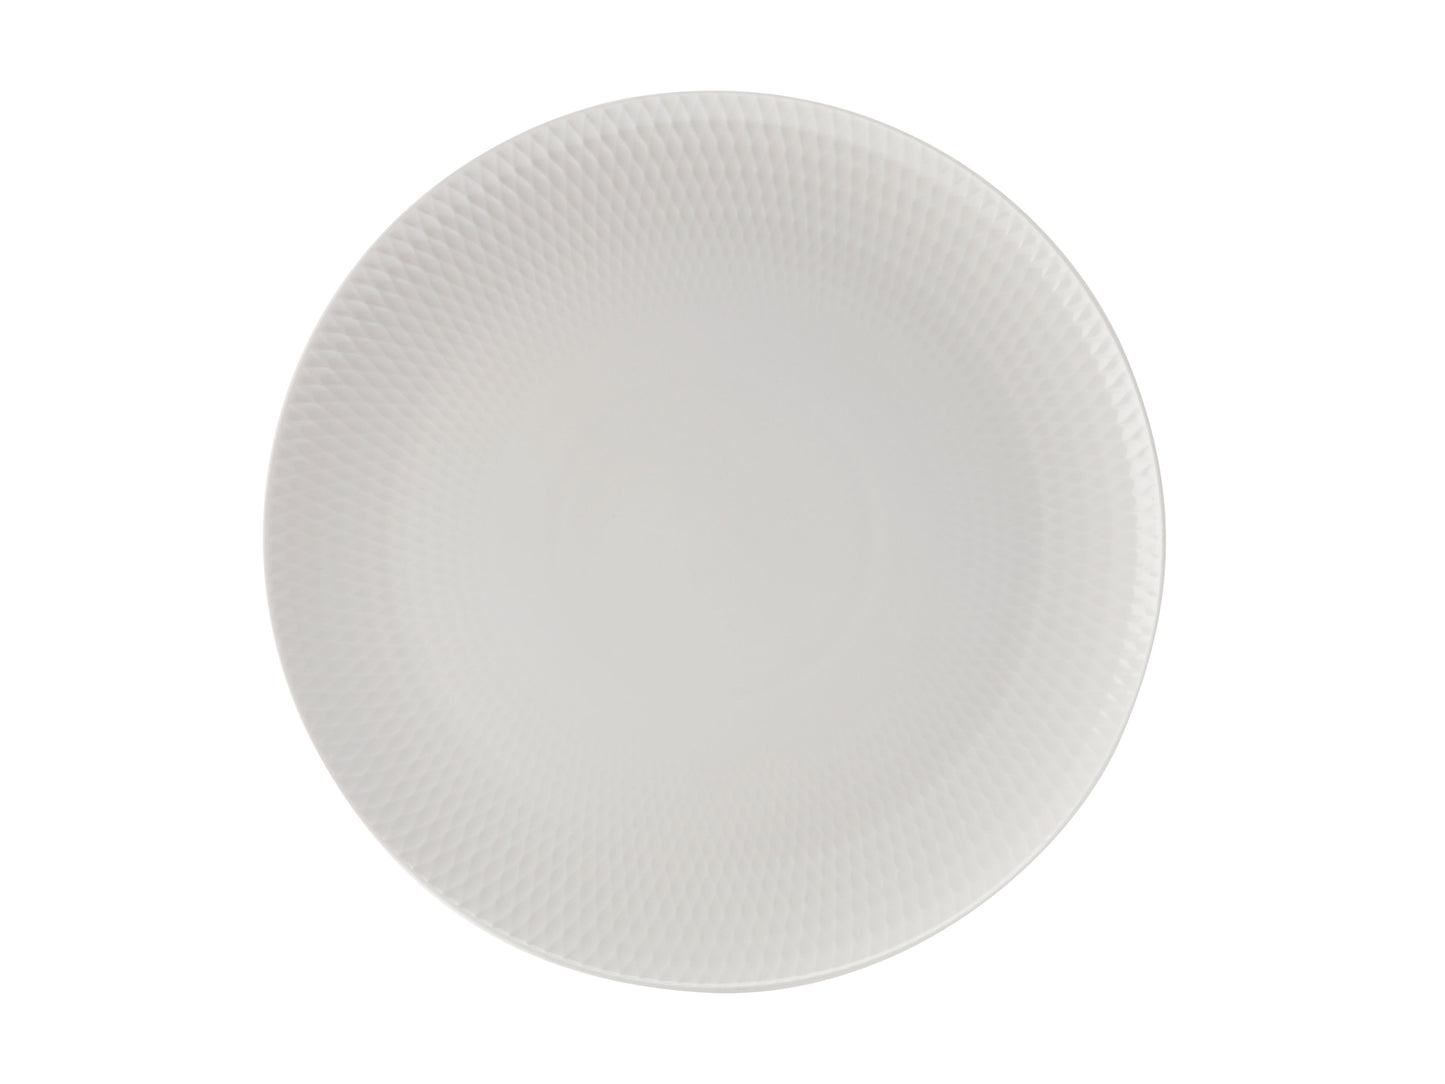 Maxwell & Williams Diamonds Charger Plate 30cm